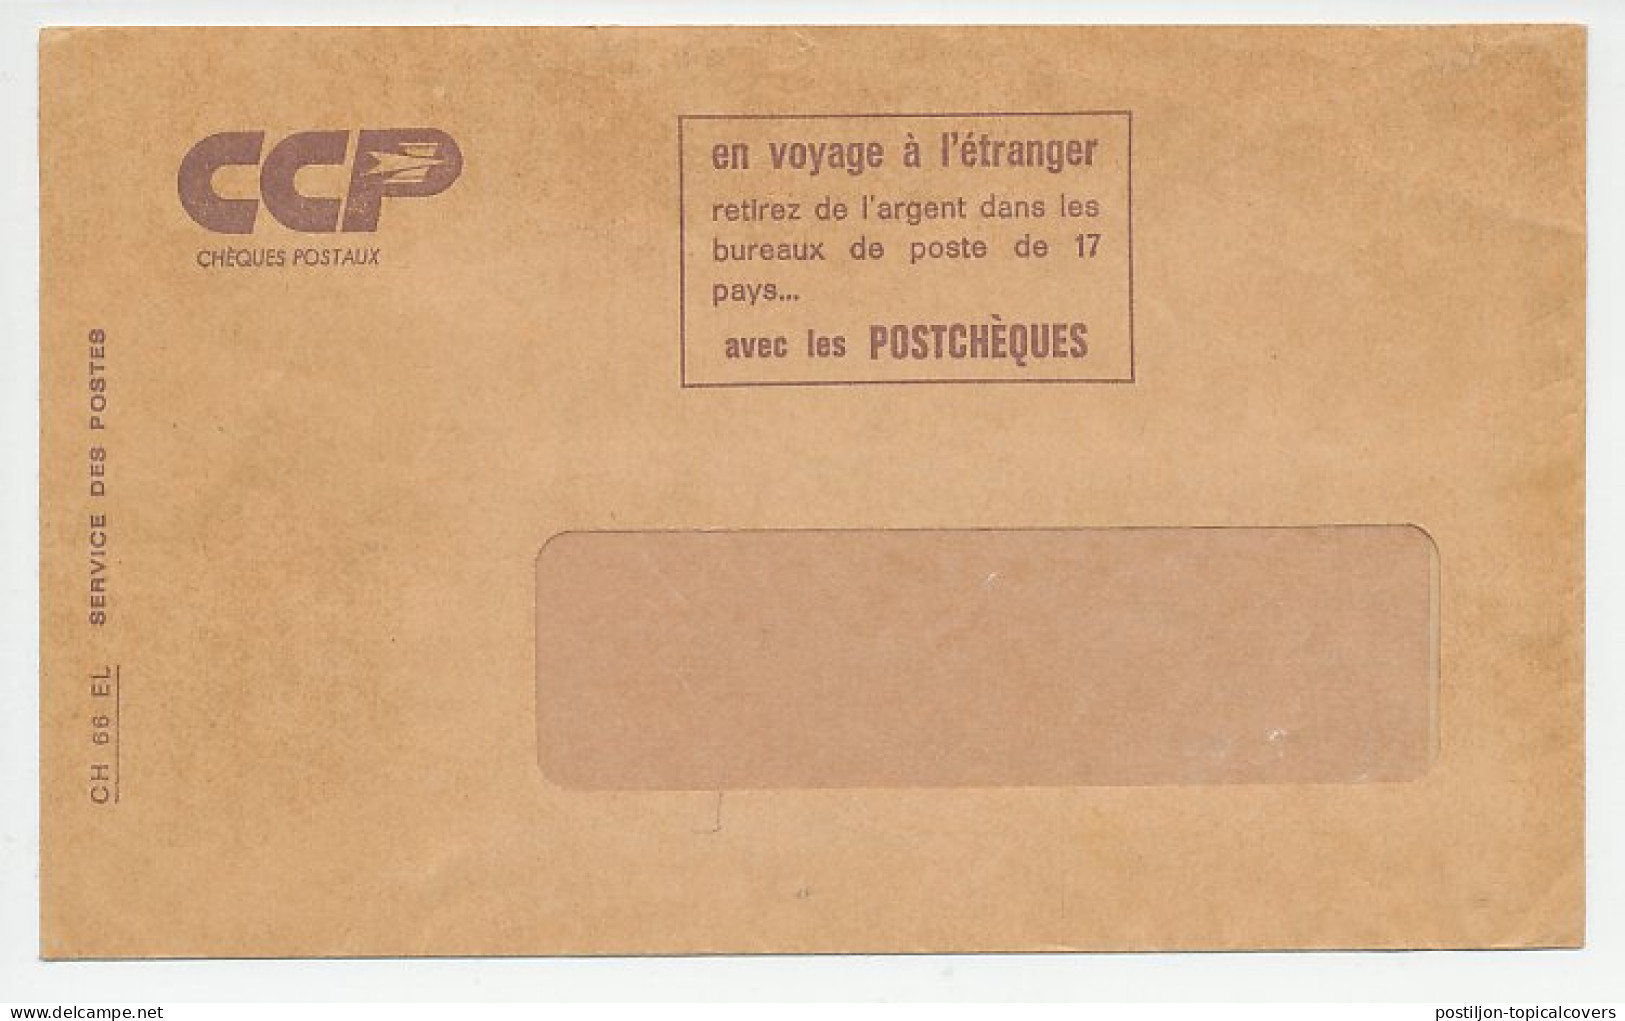 Postal Cheque Cover France Photographic Film - Photography